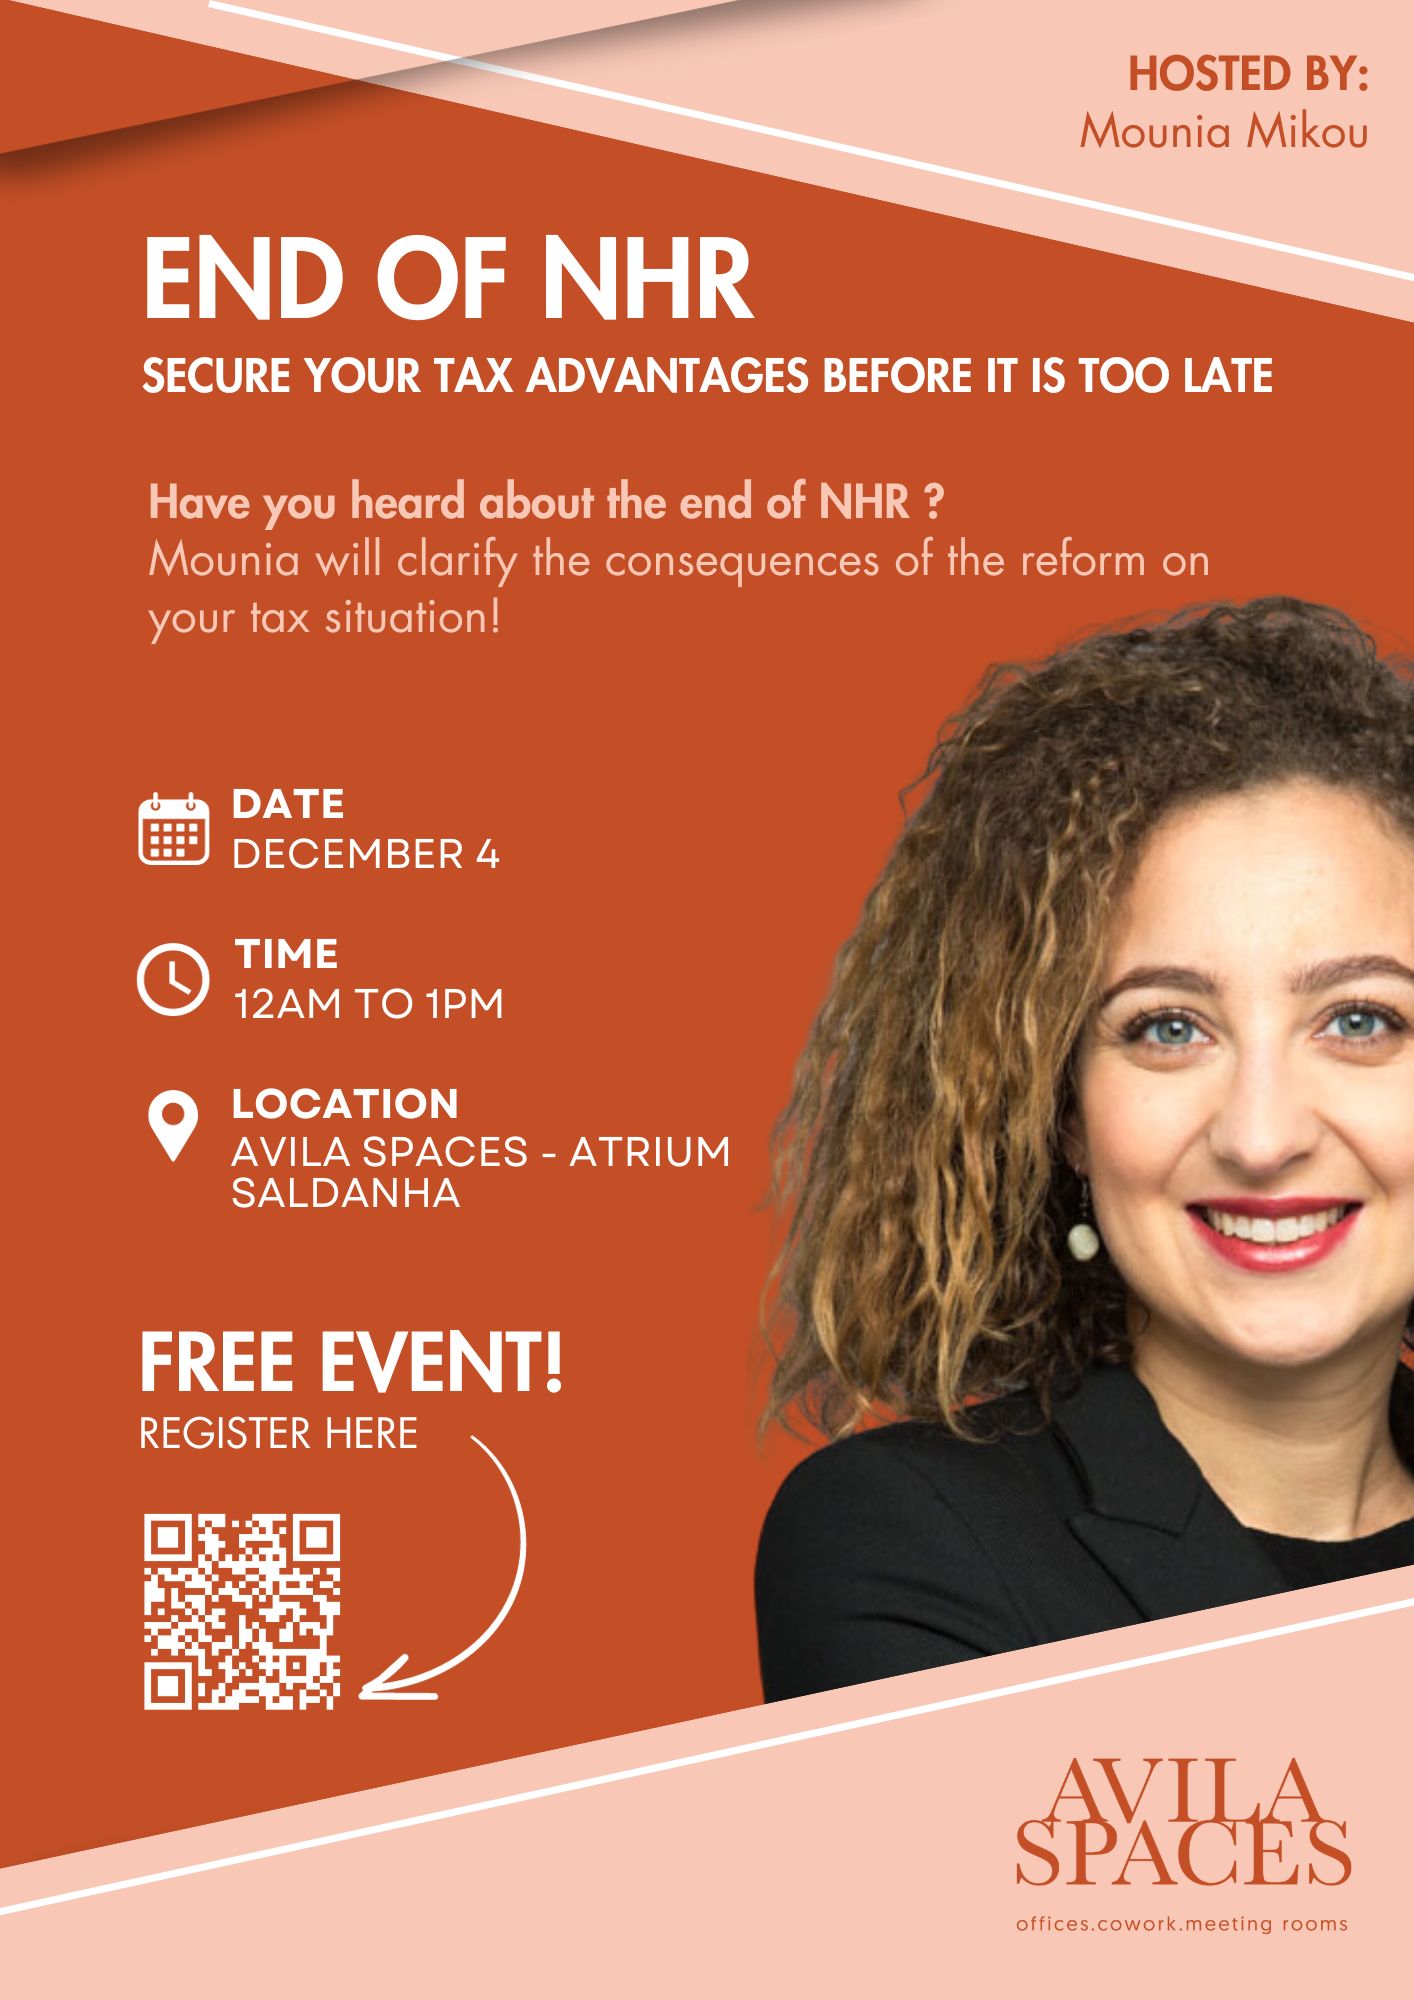 End of NHR: Secure your tax advantages before it is too late!